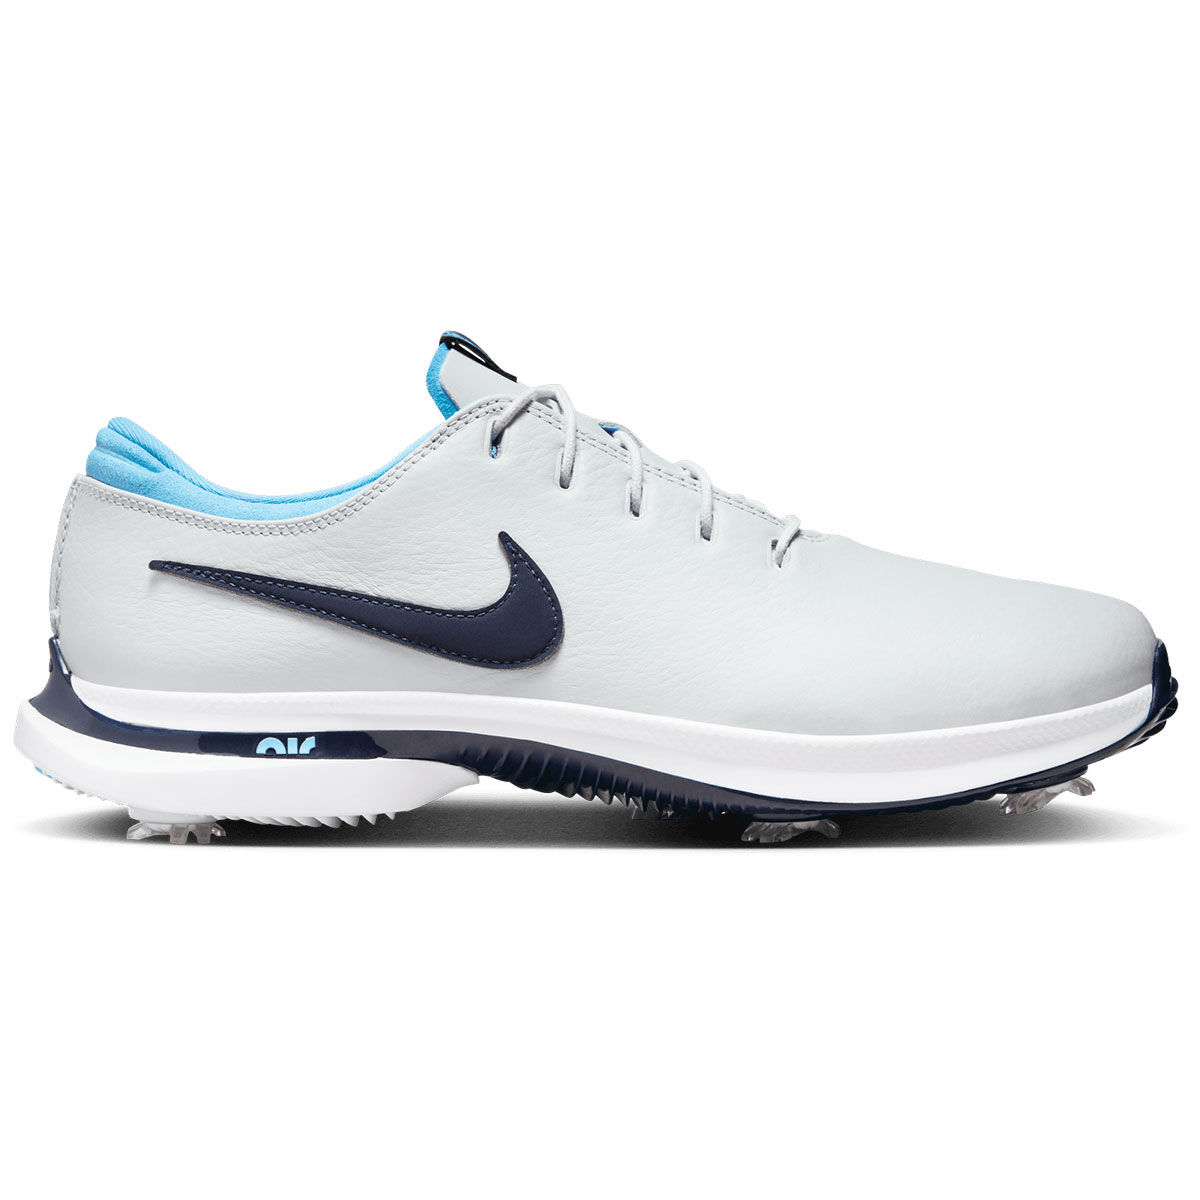 Nike Air Zoom Victory Tour 3 Waterproof Spiked Golf Shoes, Mens, Pure platinum/obsidian/white, 9 | American Golf von Nike Golf